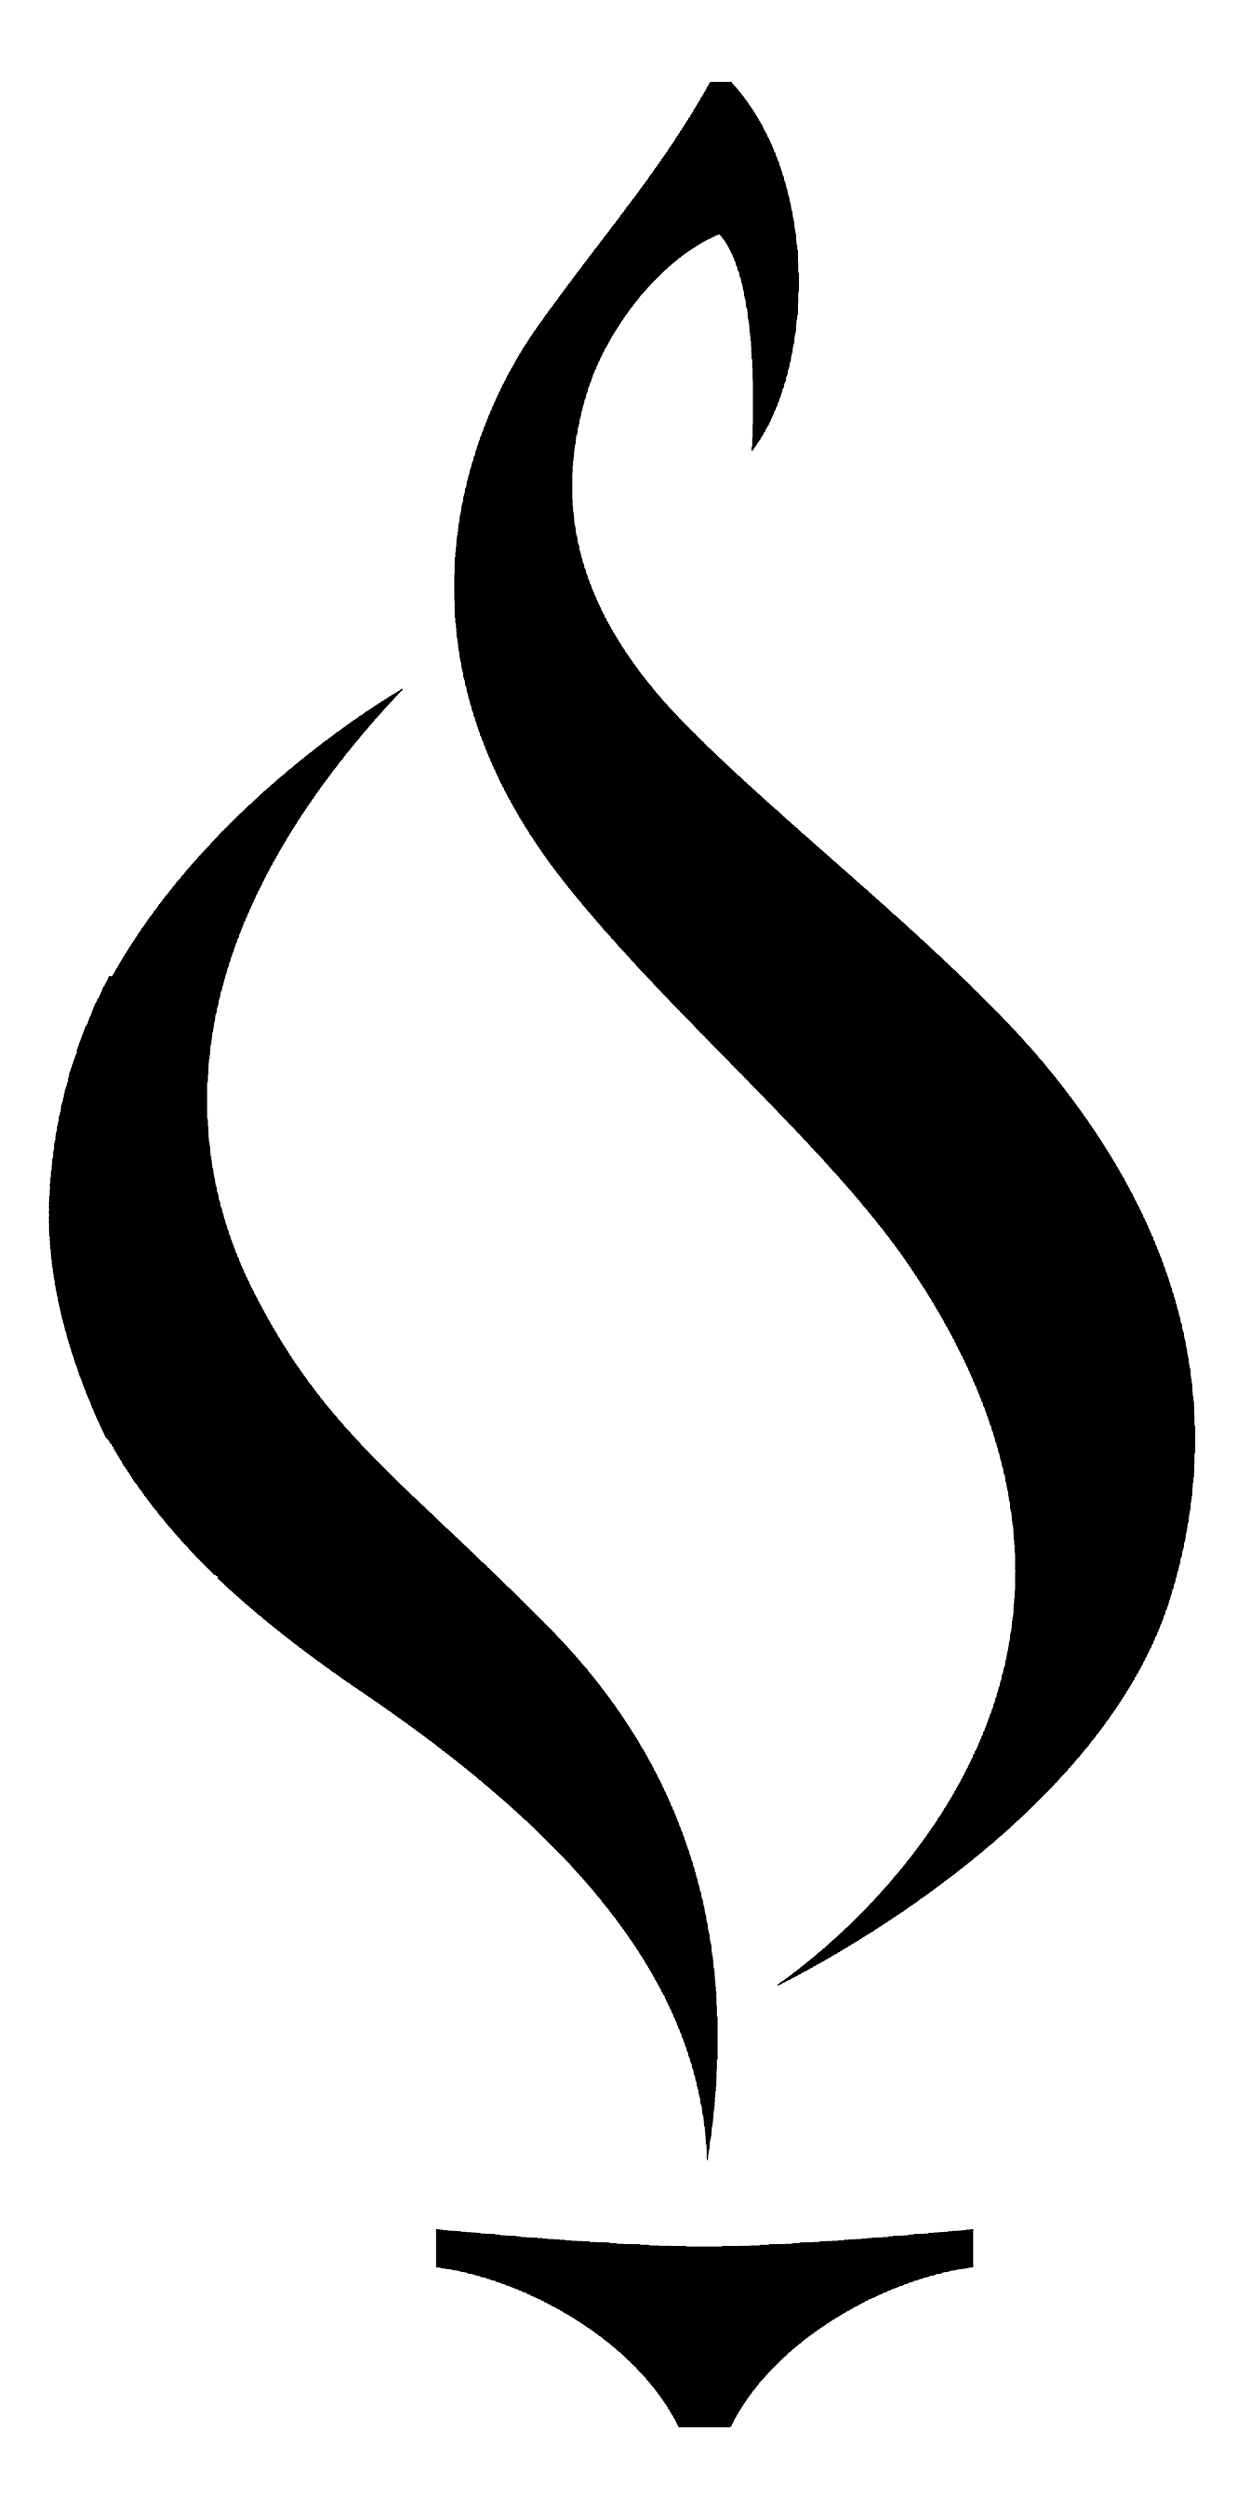 Flames flame clip art picture gallery image 4 - Clipartix